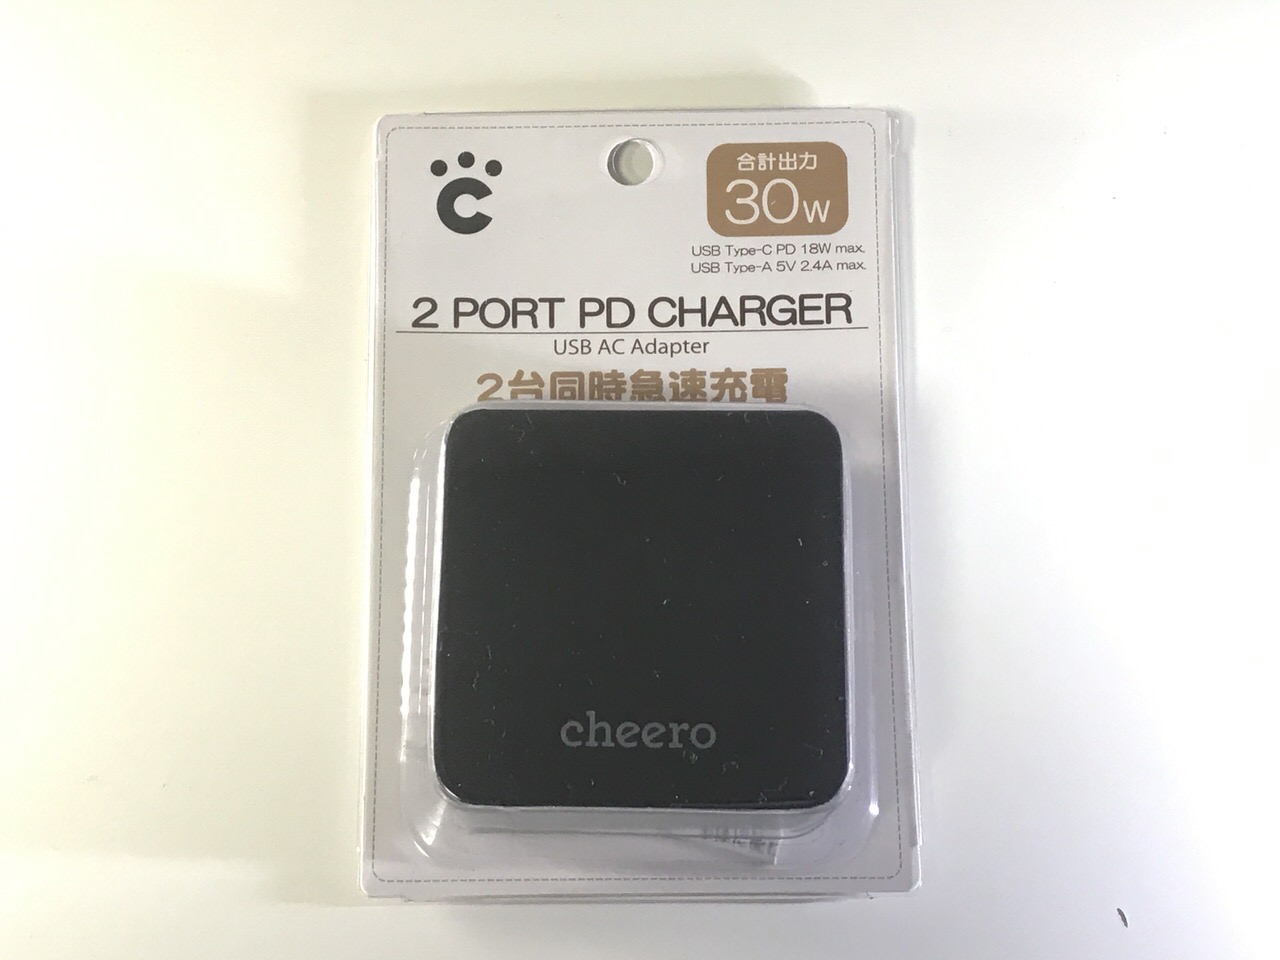 「cheero 2 port PD Charger ( PD 18W + USB ) 」1